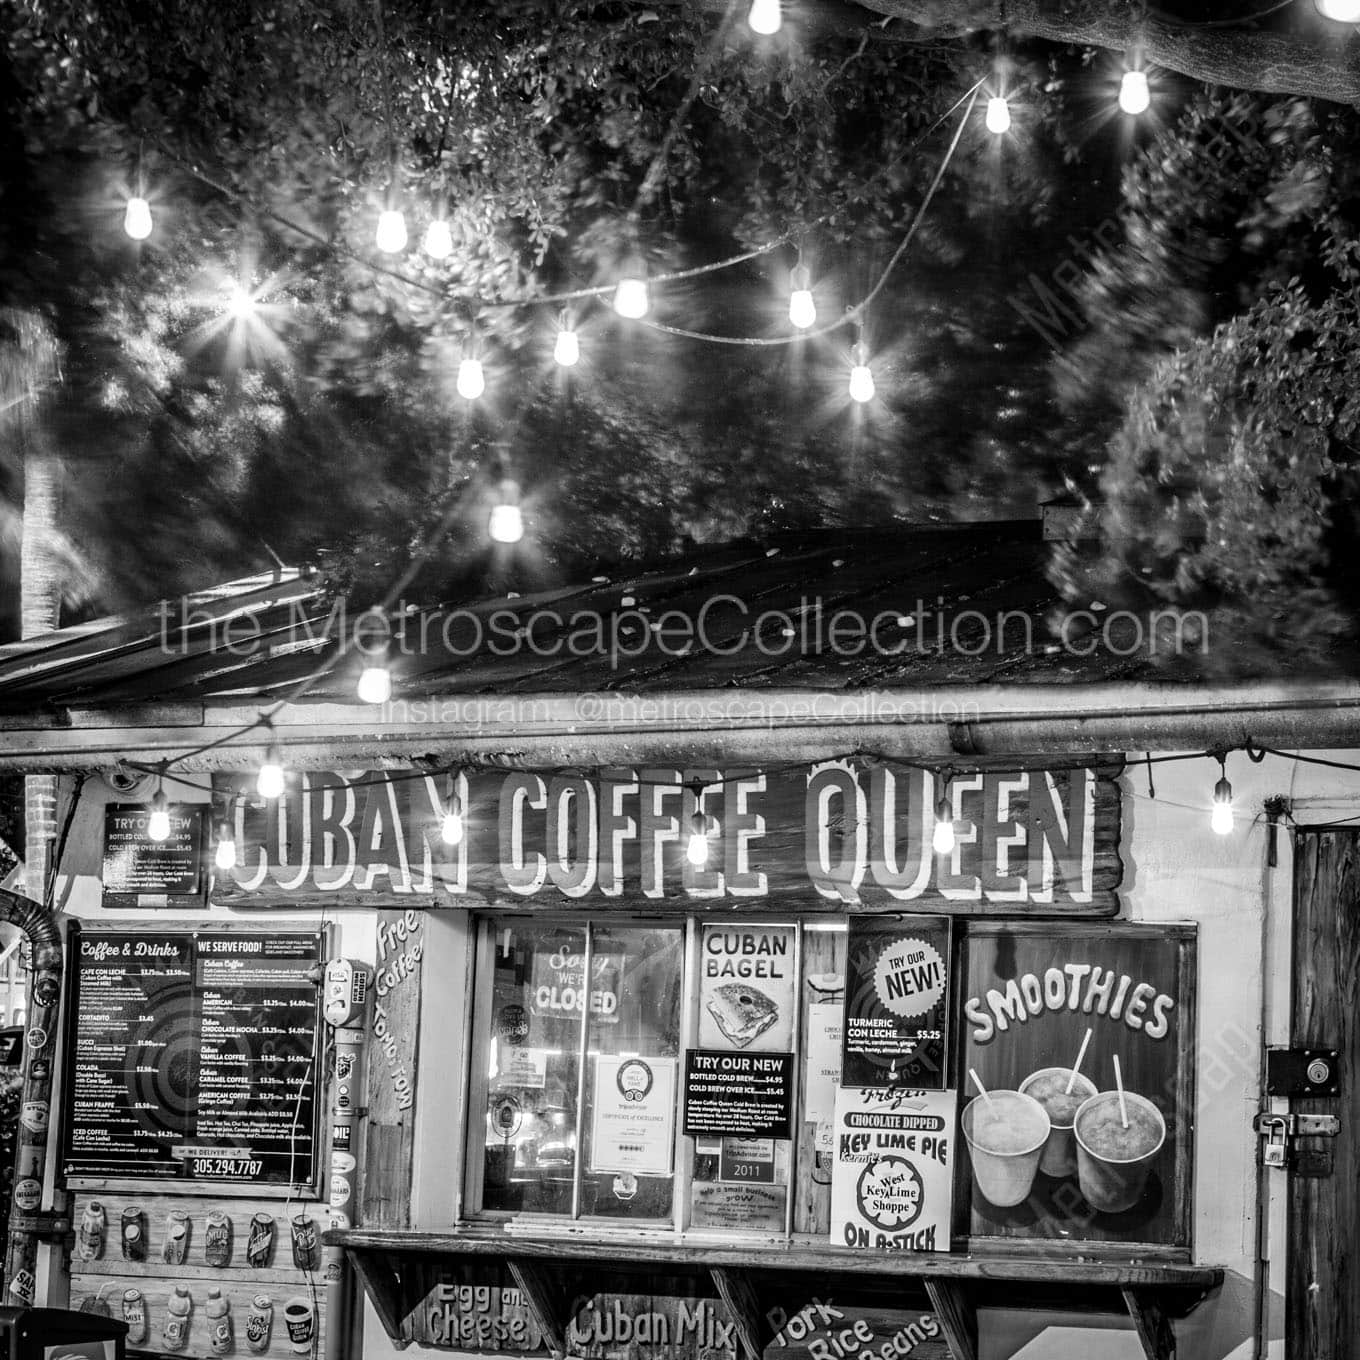 cuban coffee queen stand at night Black & White Office Art